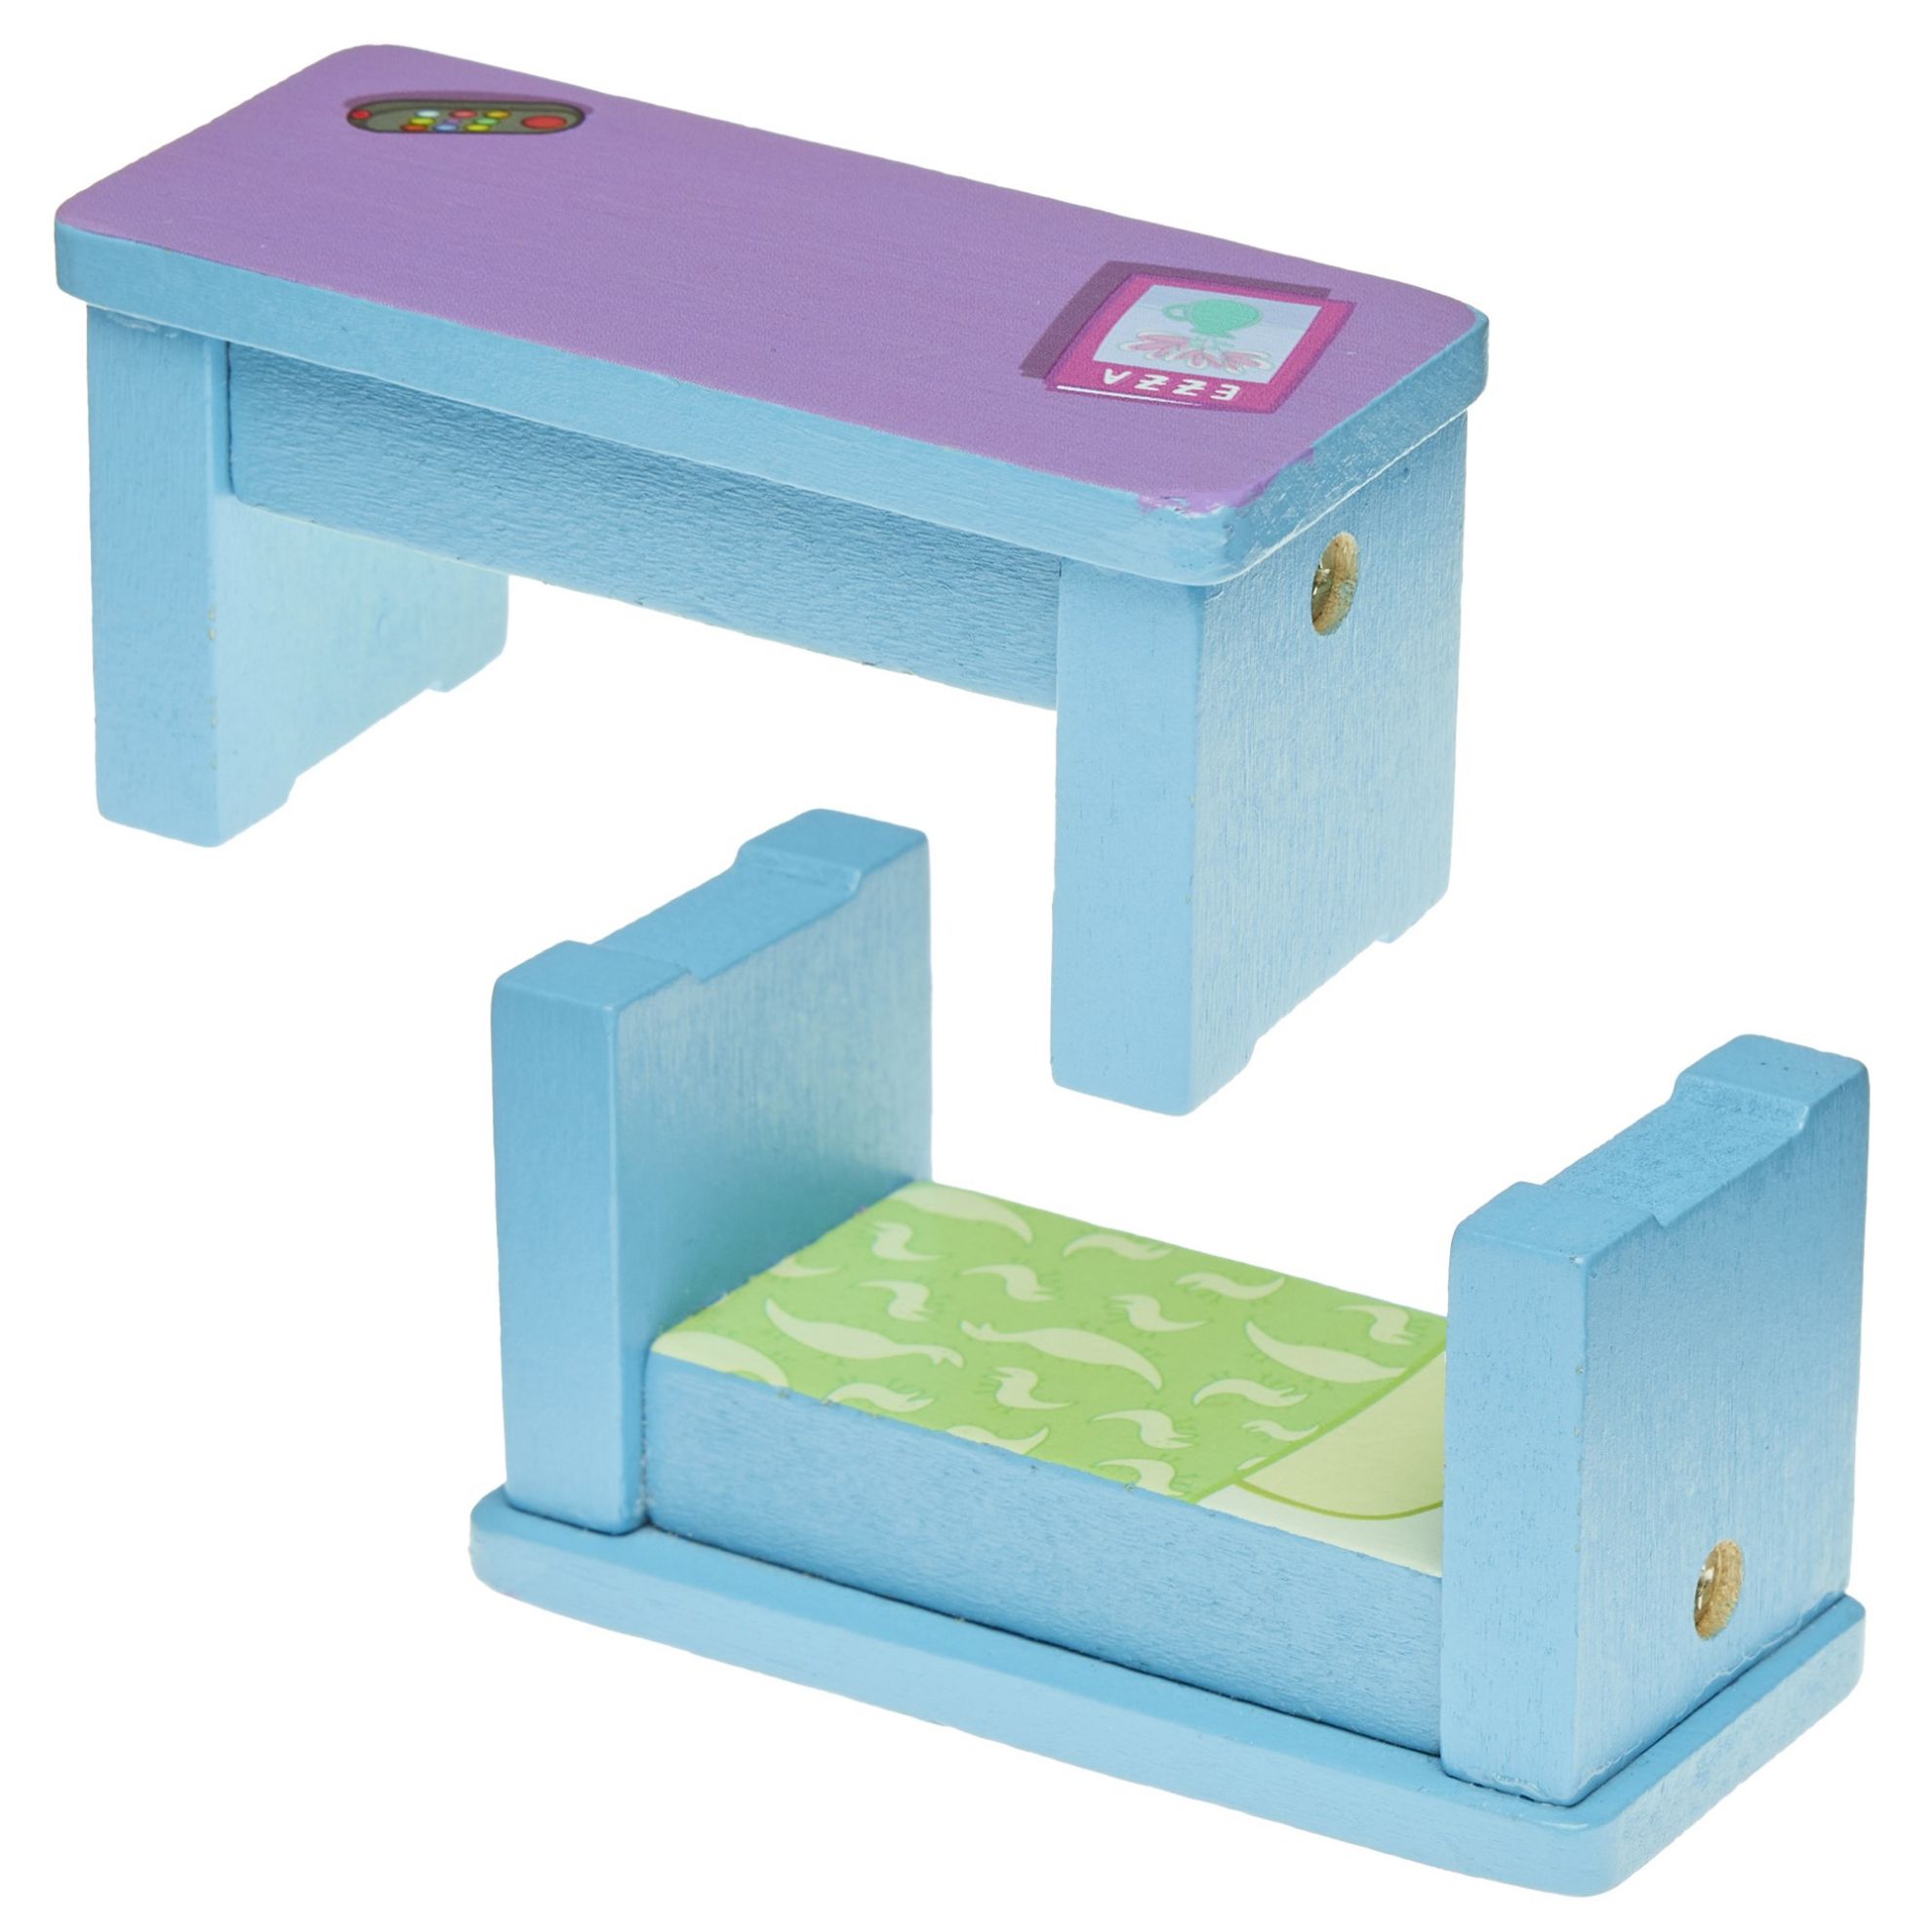 Spare Parts - Peppa Pig's Wooden Family Home - Reversible Dining Table/Bed